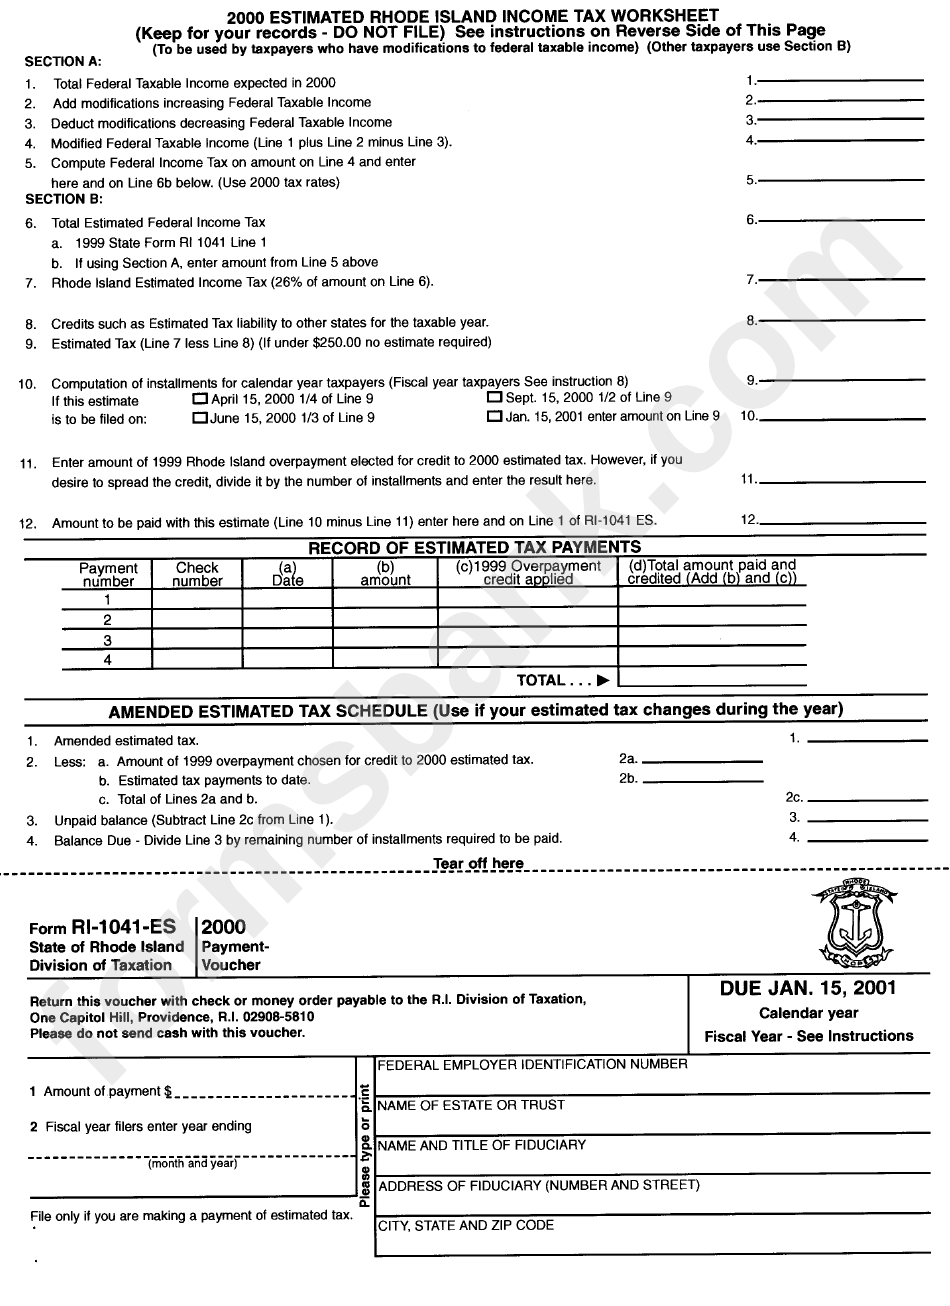 Form Ri-1041-Es - 2000 Payment Voucher - State Of Rhode Island Division Of Taxation